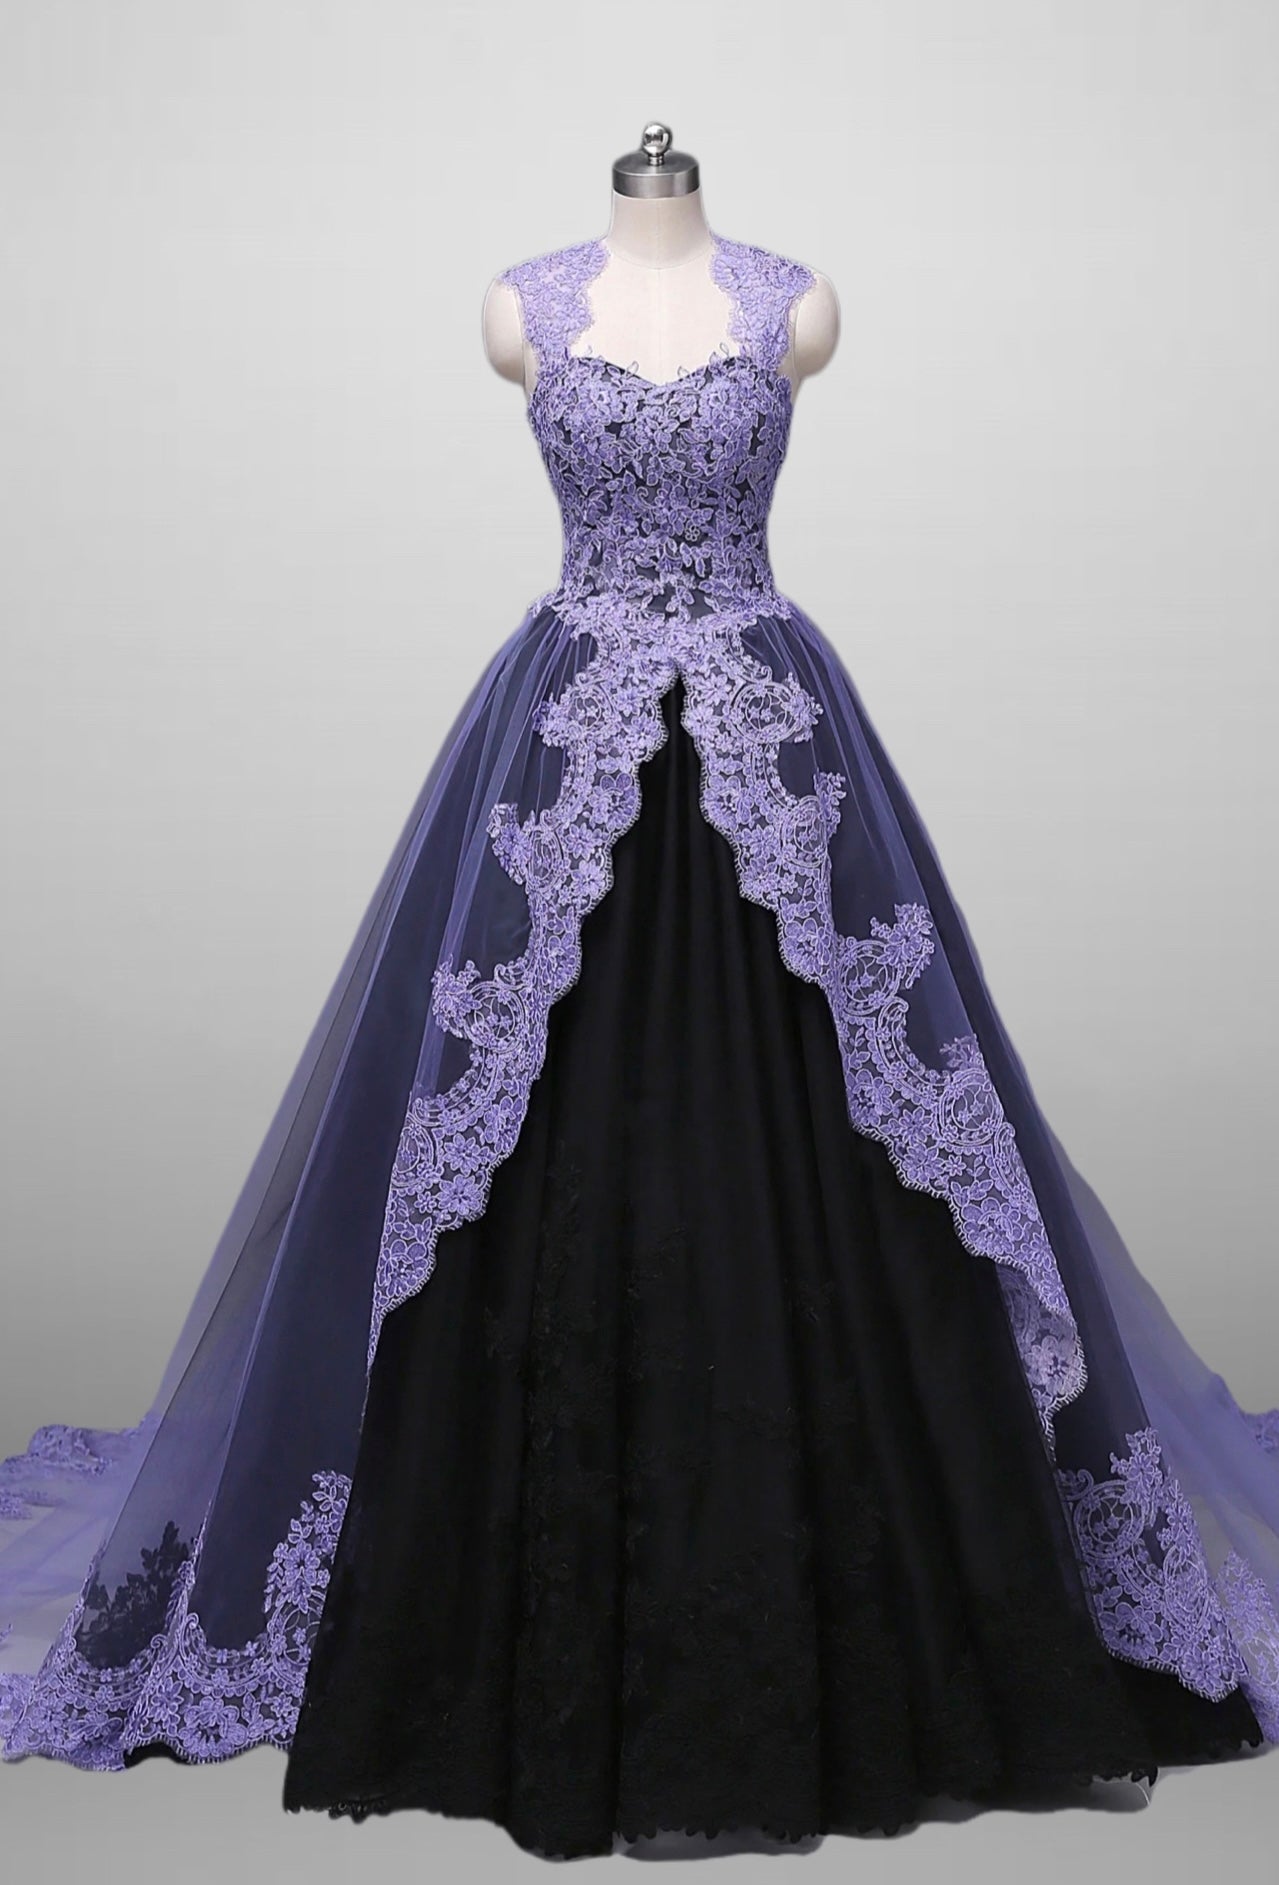 Gothic Purple And Black Wedding Dress With Lace Embroidery A-line Black Ball Gown Plus Size - WonderlandByLilian